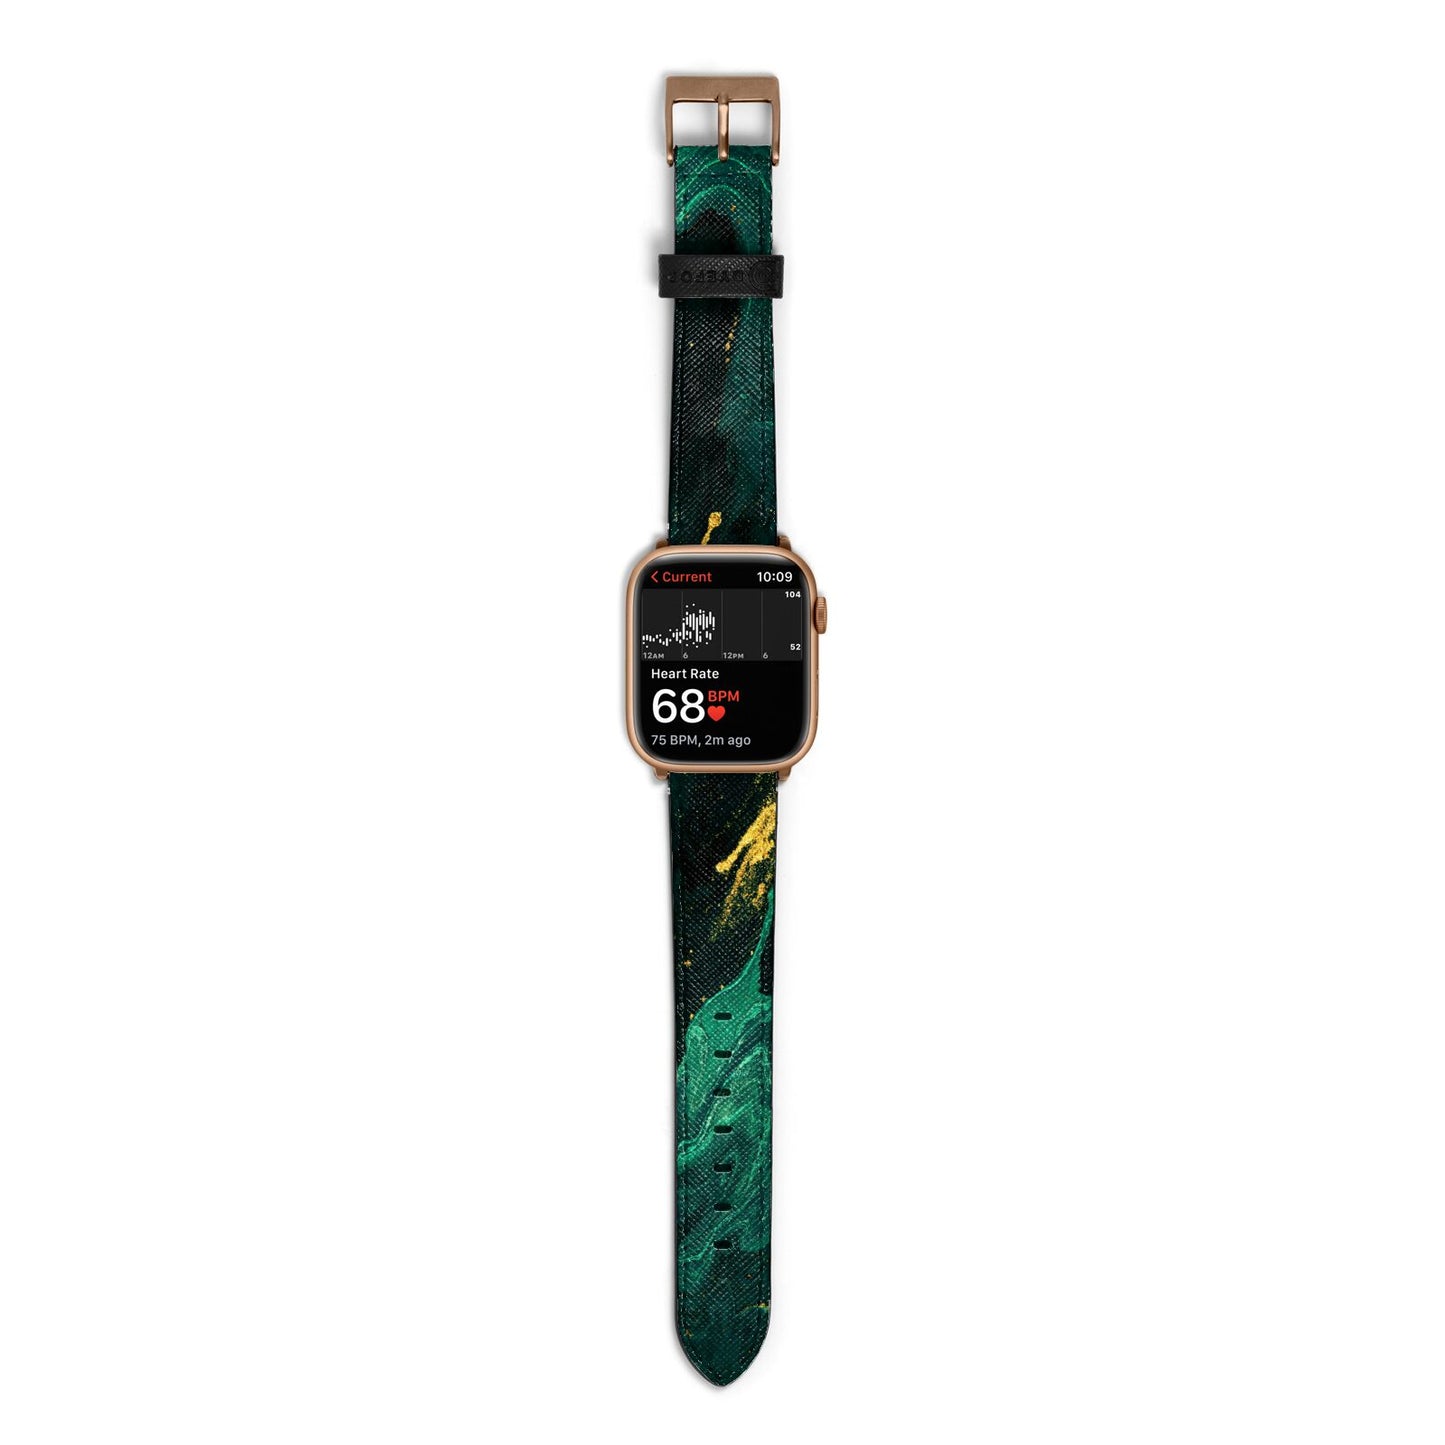 Emerald Green Apple Watch Strap Size 38mm with Gold Hardware